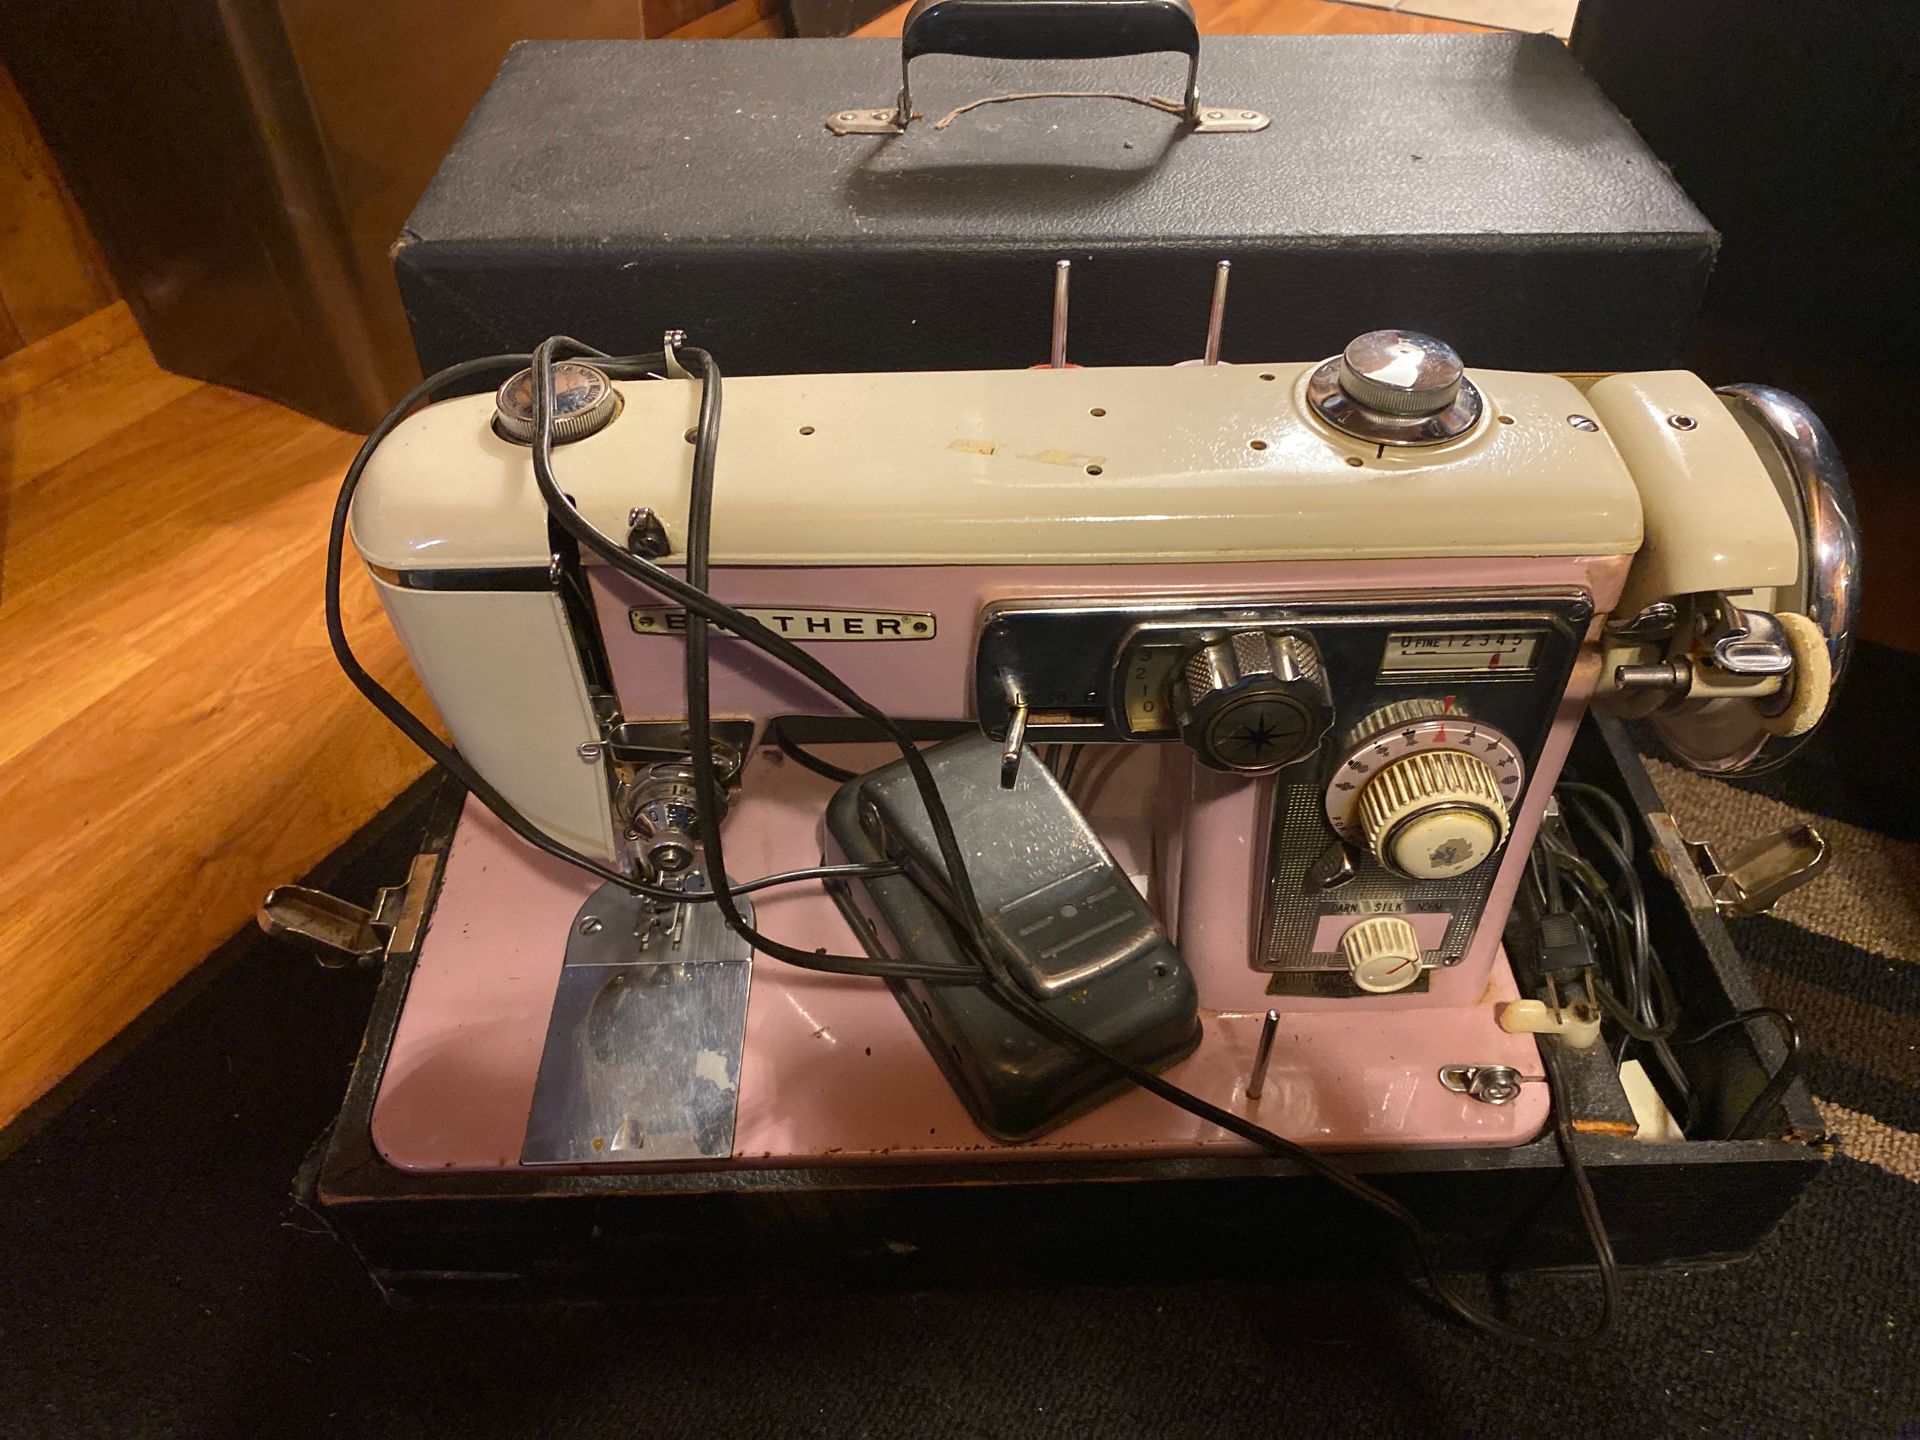 Old sewing machine .brother model 210